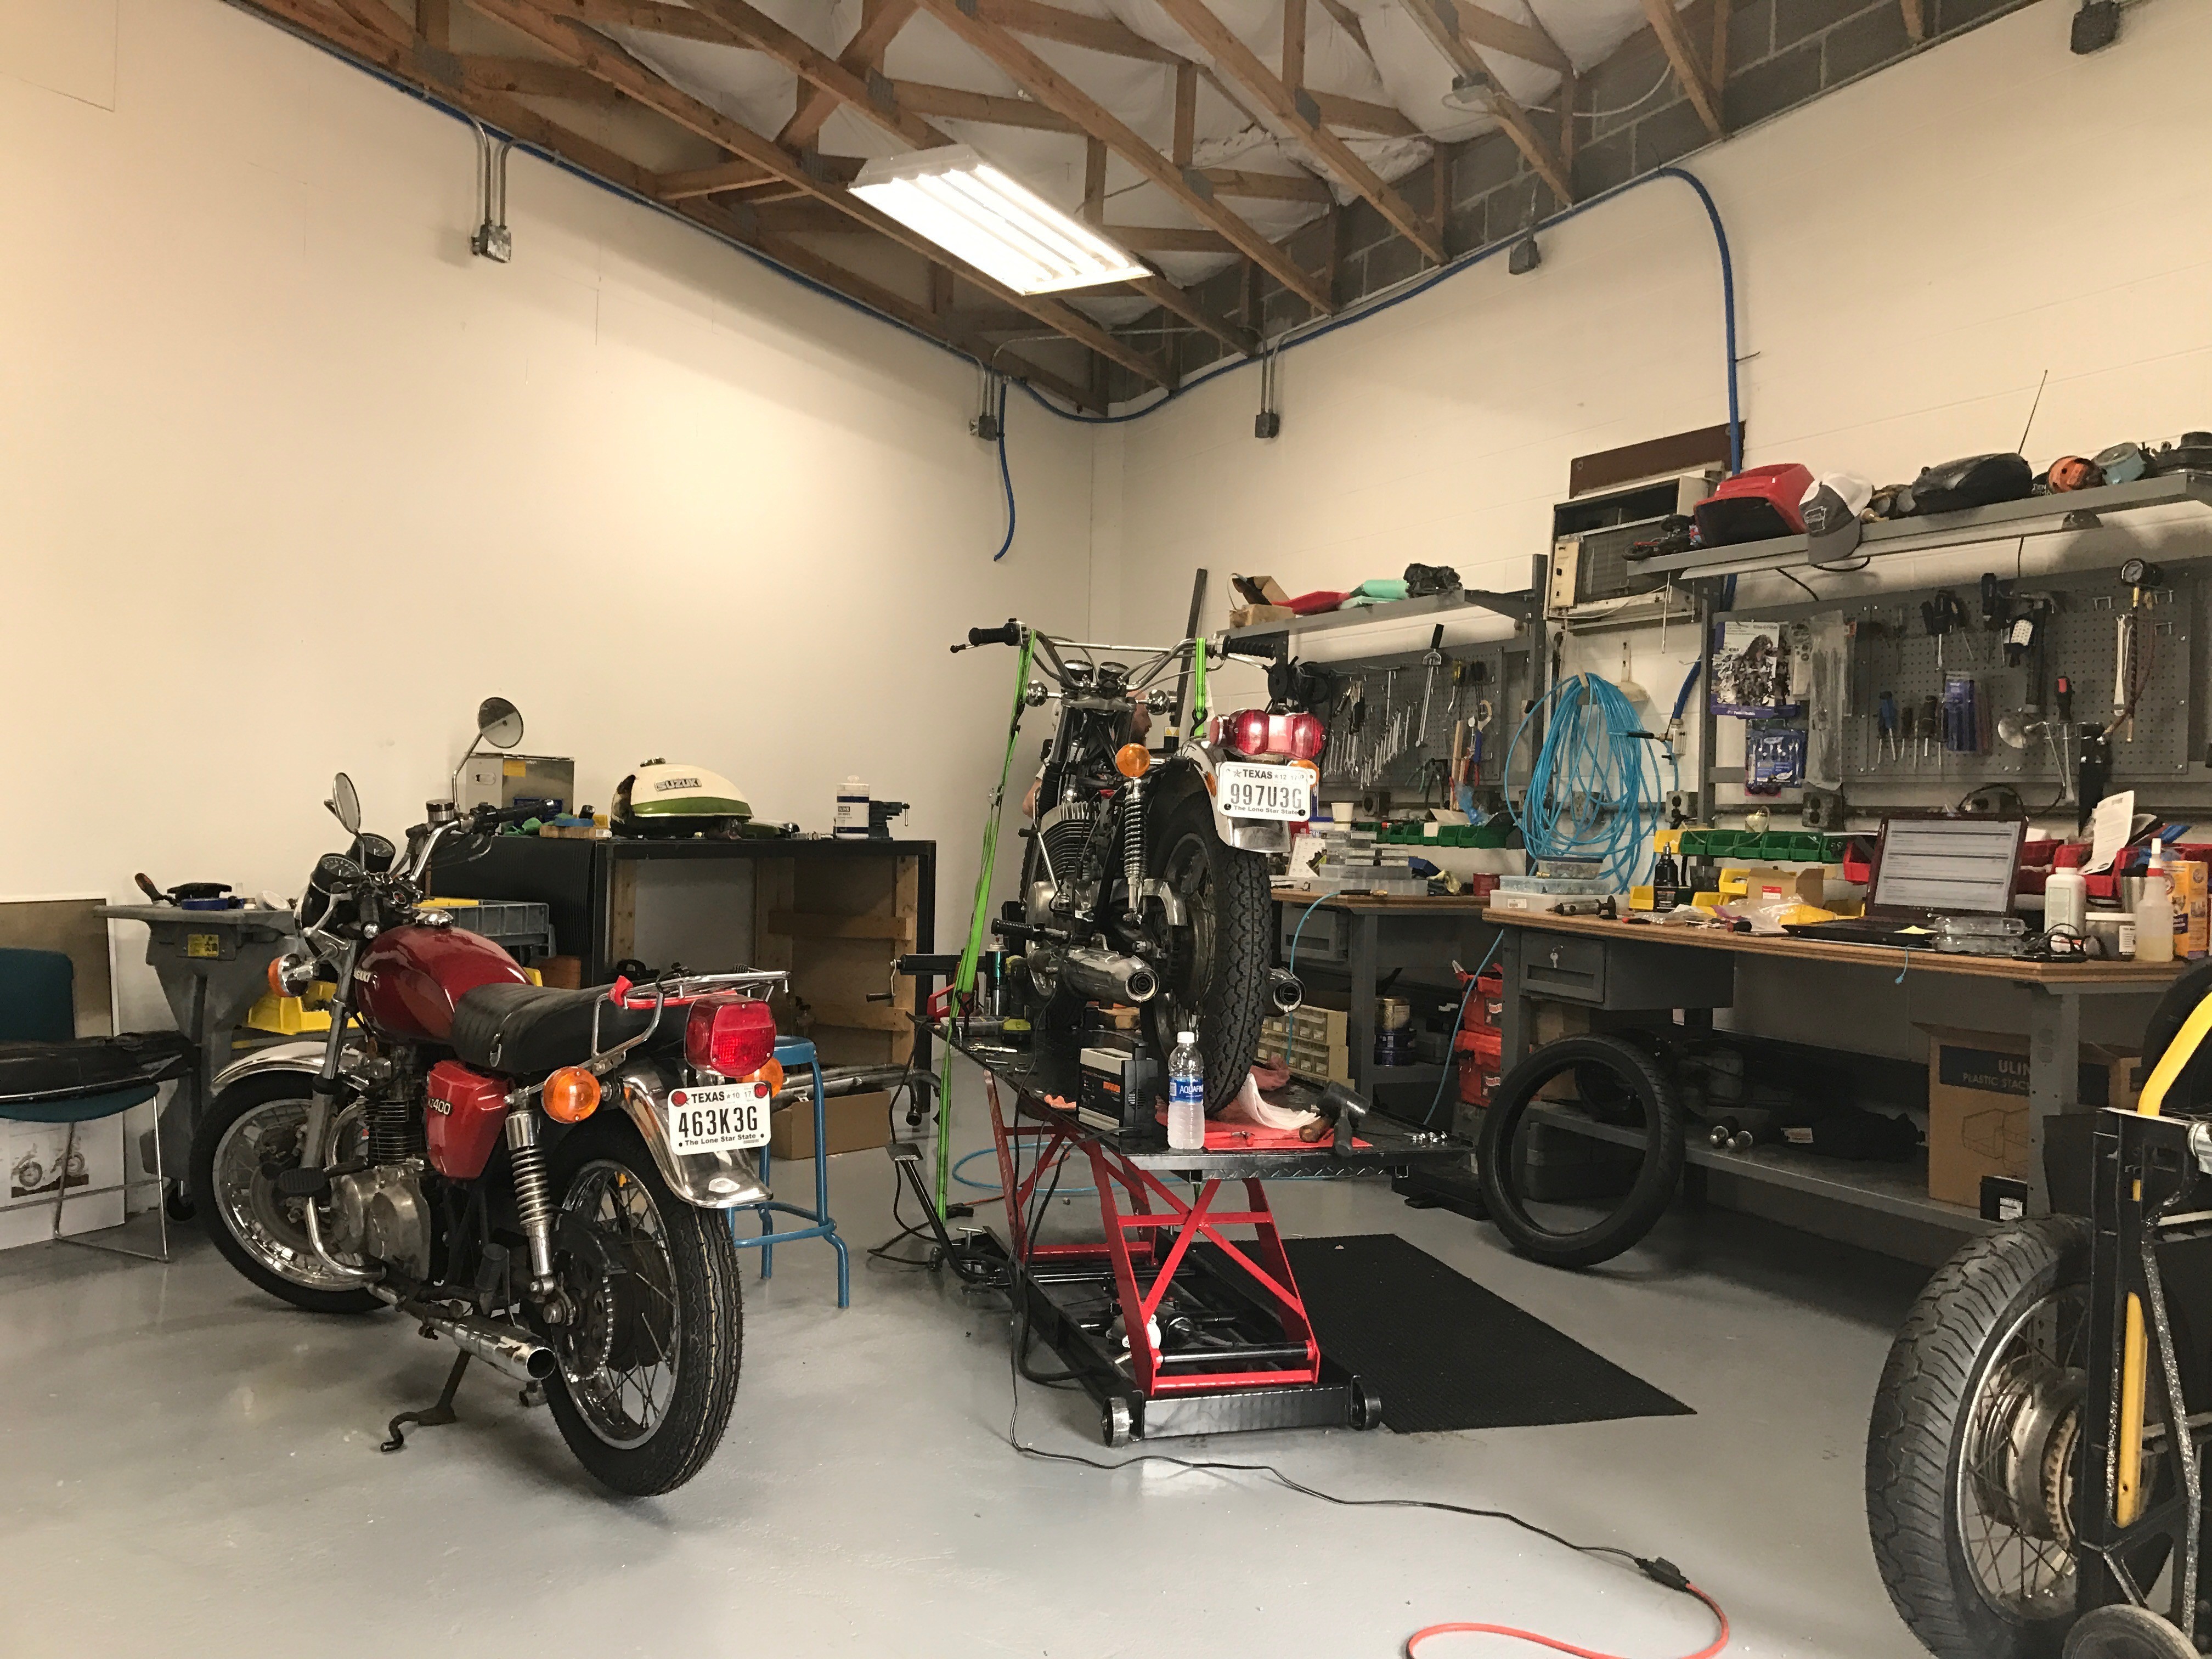 Local Moto + Provisions Brings a Vintage Motorcycle Repair Shop and ...